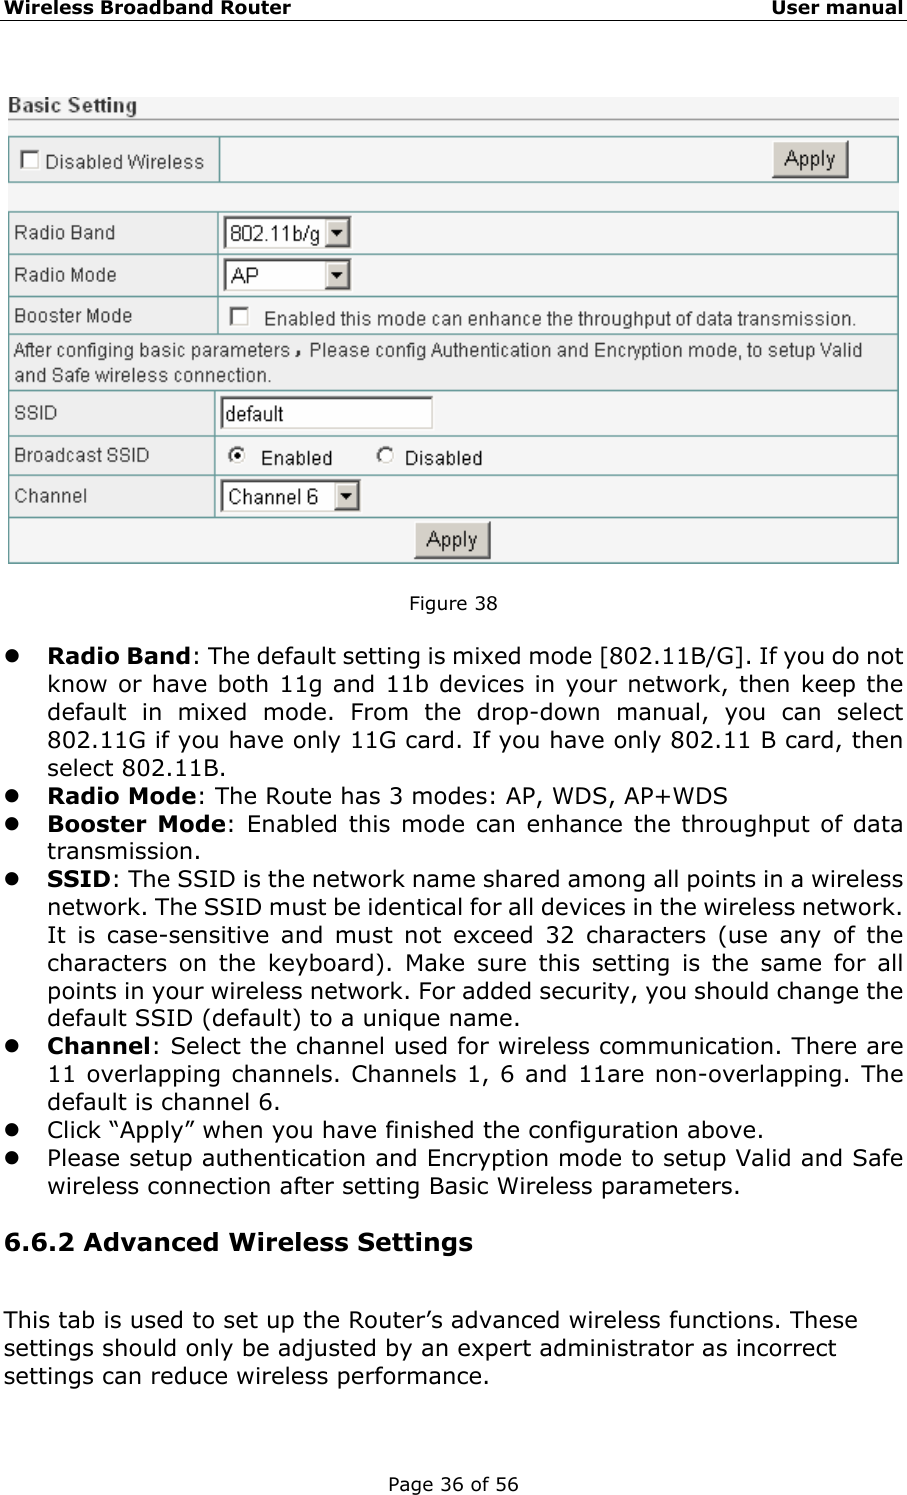 Wireless Broadband Router                                                   User manual Page 36 of 56    Figure 38  z Radio Band: The default setting is mixed mode [802.11B/G]. If you do not know or have both 11g and 11b devices in your network, then keep the default in mixed mode. From the drop-down manual, you can select 802.11G if you have only 11G card. If you have only 802.11 B card, then select 802.11B. z Radio Mode: The Route has 3 modes: AP, WDS, AP+WDS z Booster Mode: Enabled this mode can enhance the throughput of data transmission. z SSID: The SSID is the network name shared among all points in a wireless network. The SSID must be identical for all devices in the wireless network. It is case-sensitive and must not exceed 32 characters (use any of the characters on the keyboard). Make sure this setting is the same for all points in your wireless network. For added security, you should change the default SSID (default) to a unique name. z Channel: Select the channel used for wireless communication. There are 11 overlapping channels. Channels 1, 6 and 11are non-overlapping. The default is channel 6.   z Click “Apply” when you have finished the configuration above. z Please setup authentication and Encryption mode to setup Valid and Safe wireless connection after setting Basic Wireless parameters. 6.6.2 Advanced Wireless Settings This tab is used to set up the Router’s advanced wireless functions. These settings should only be adjusted by an expert administrator as incorrect settings can reduce wireless performance.  